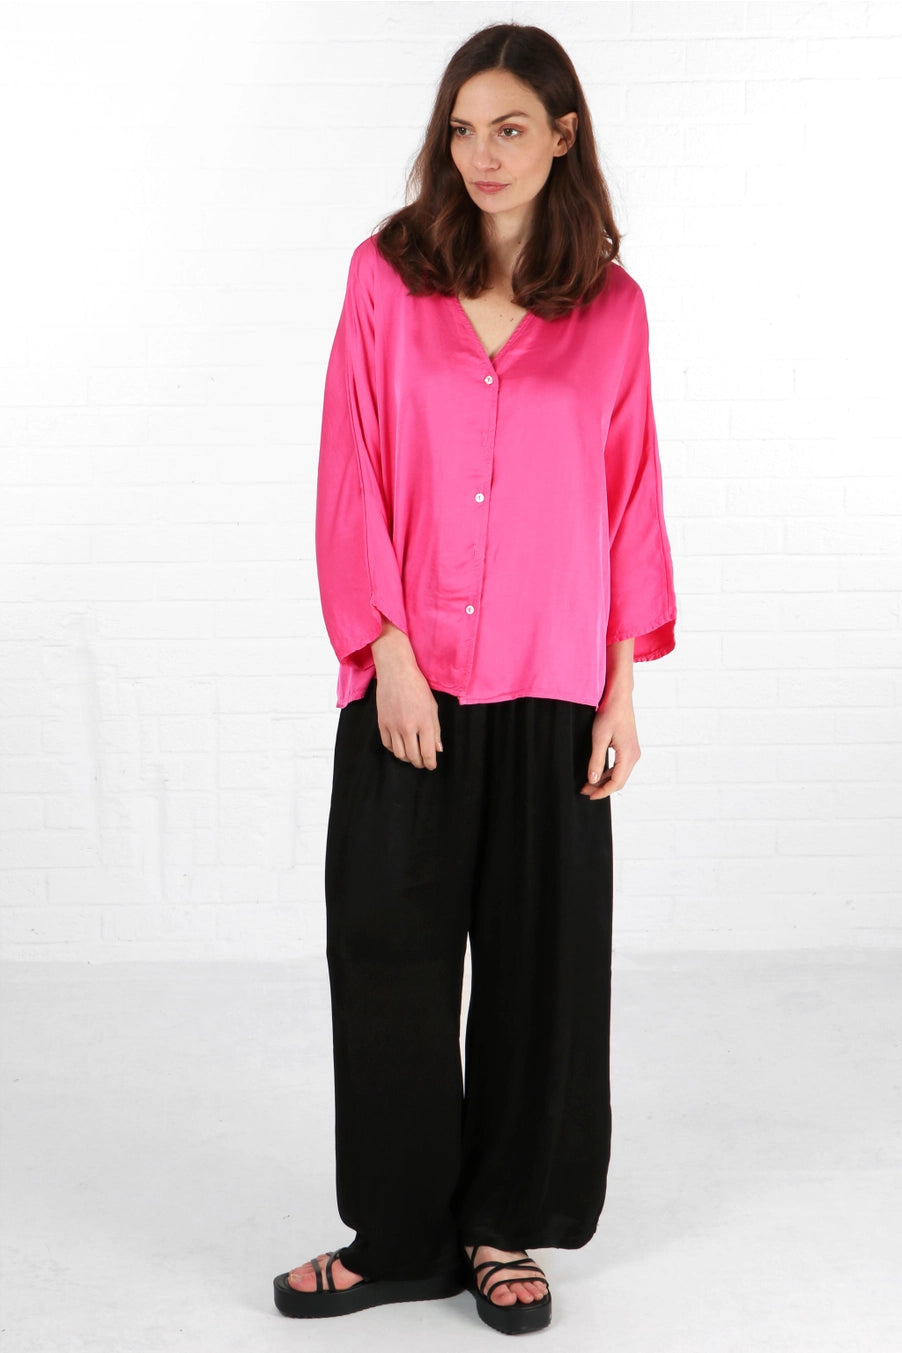 Beattie Slouch Button Down Silky Blouse in Hot Pink